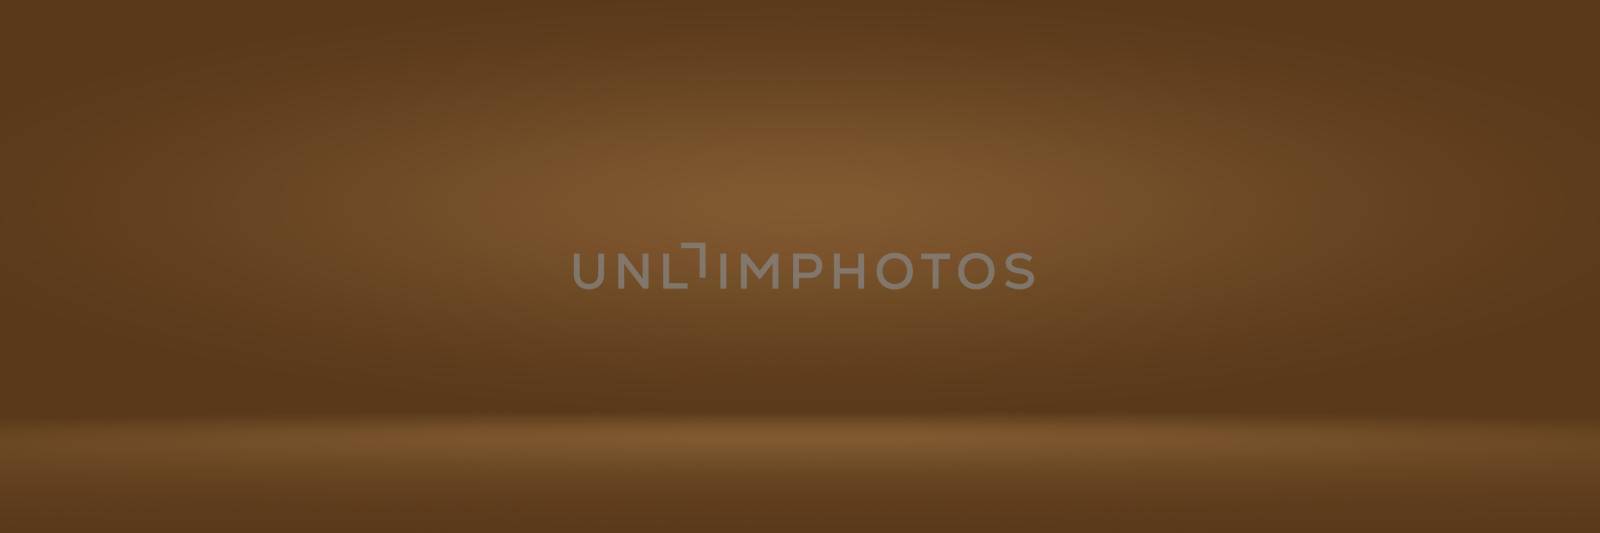 Abstract luxury plain dark brown and brown wallpaper background used for vignette frames, presentations, studio backgrounds, boards, laminate for furniture and floor tiles